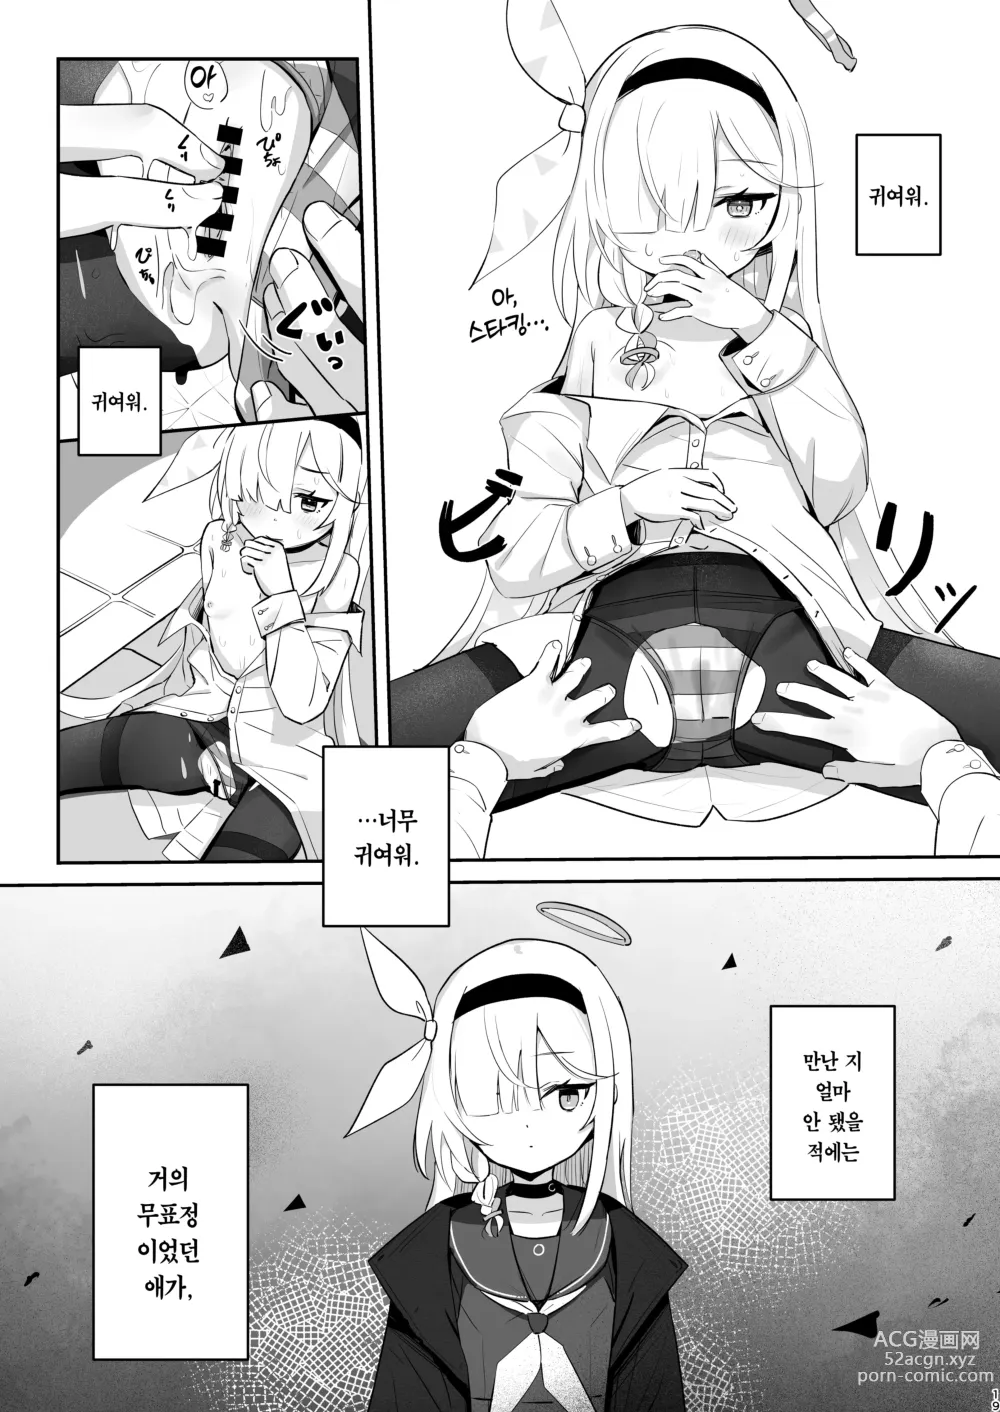 Page 18 of doujinshi 이 따스함을 알아버렸어